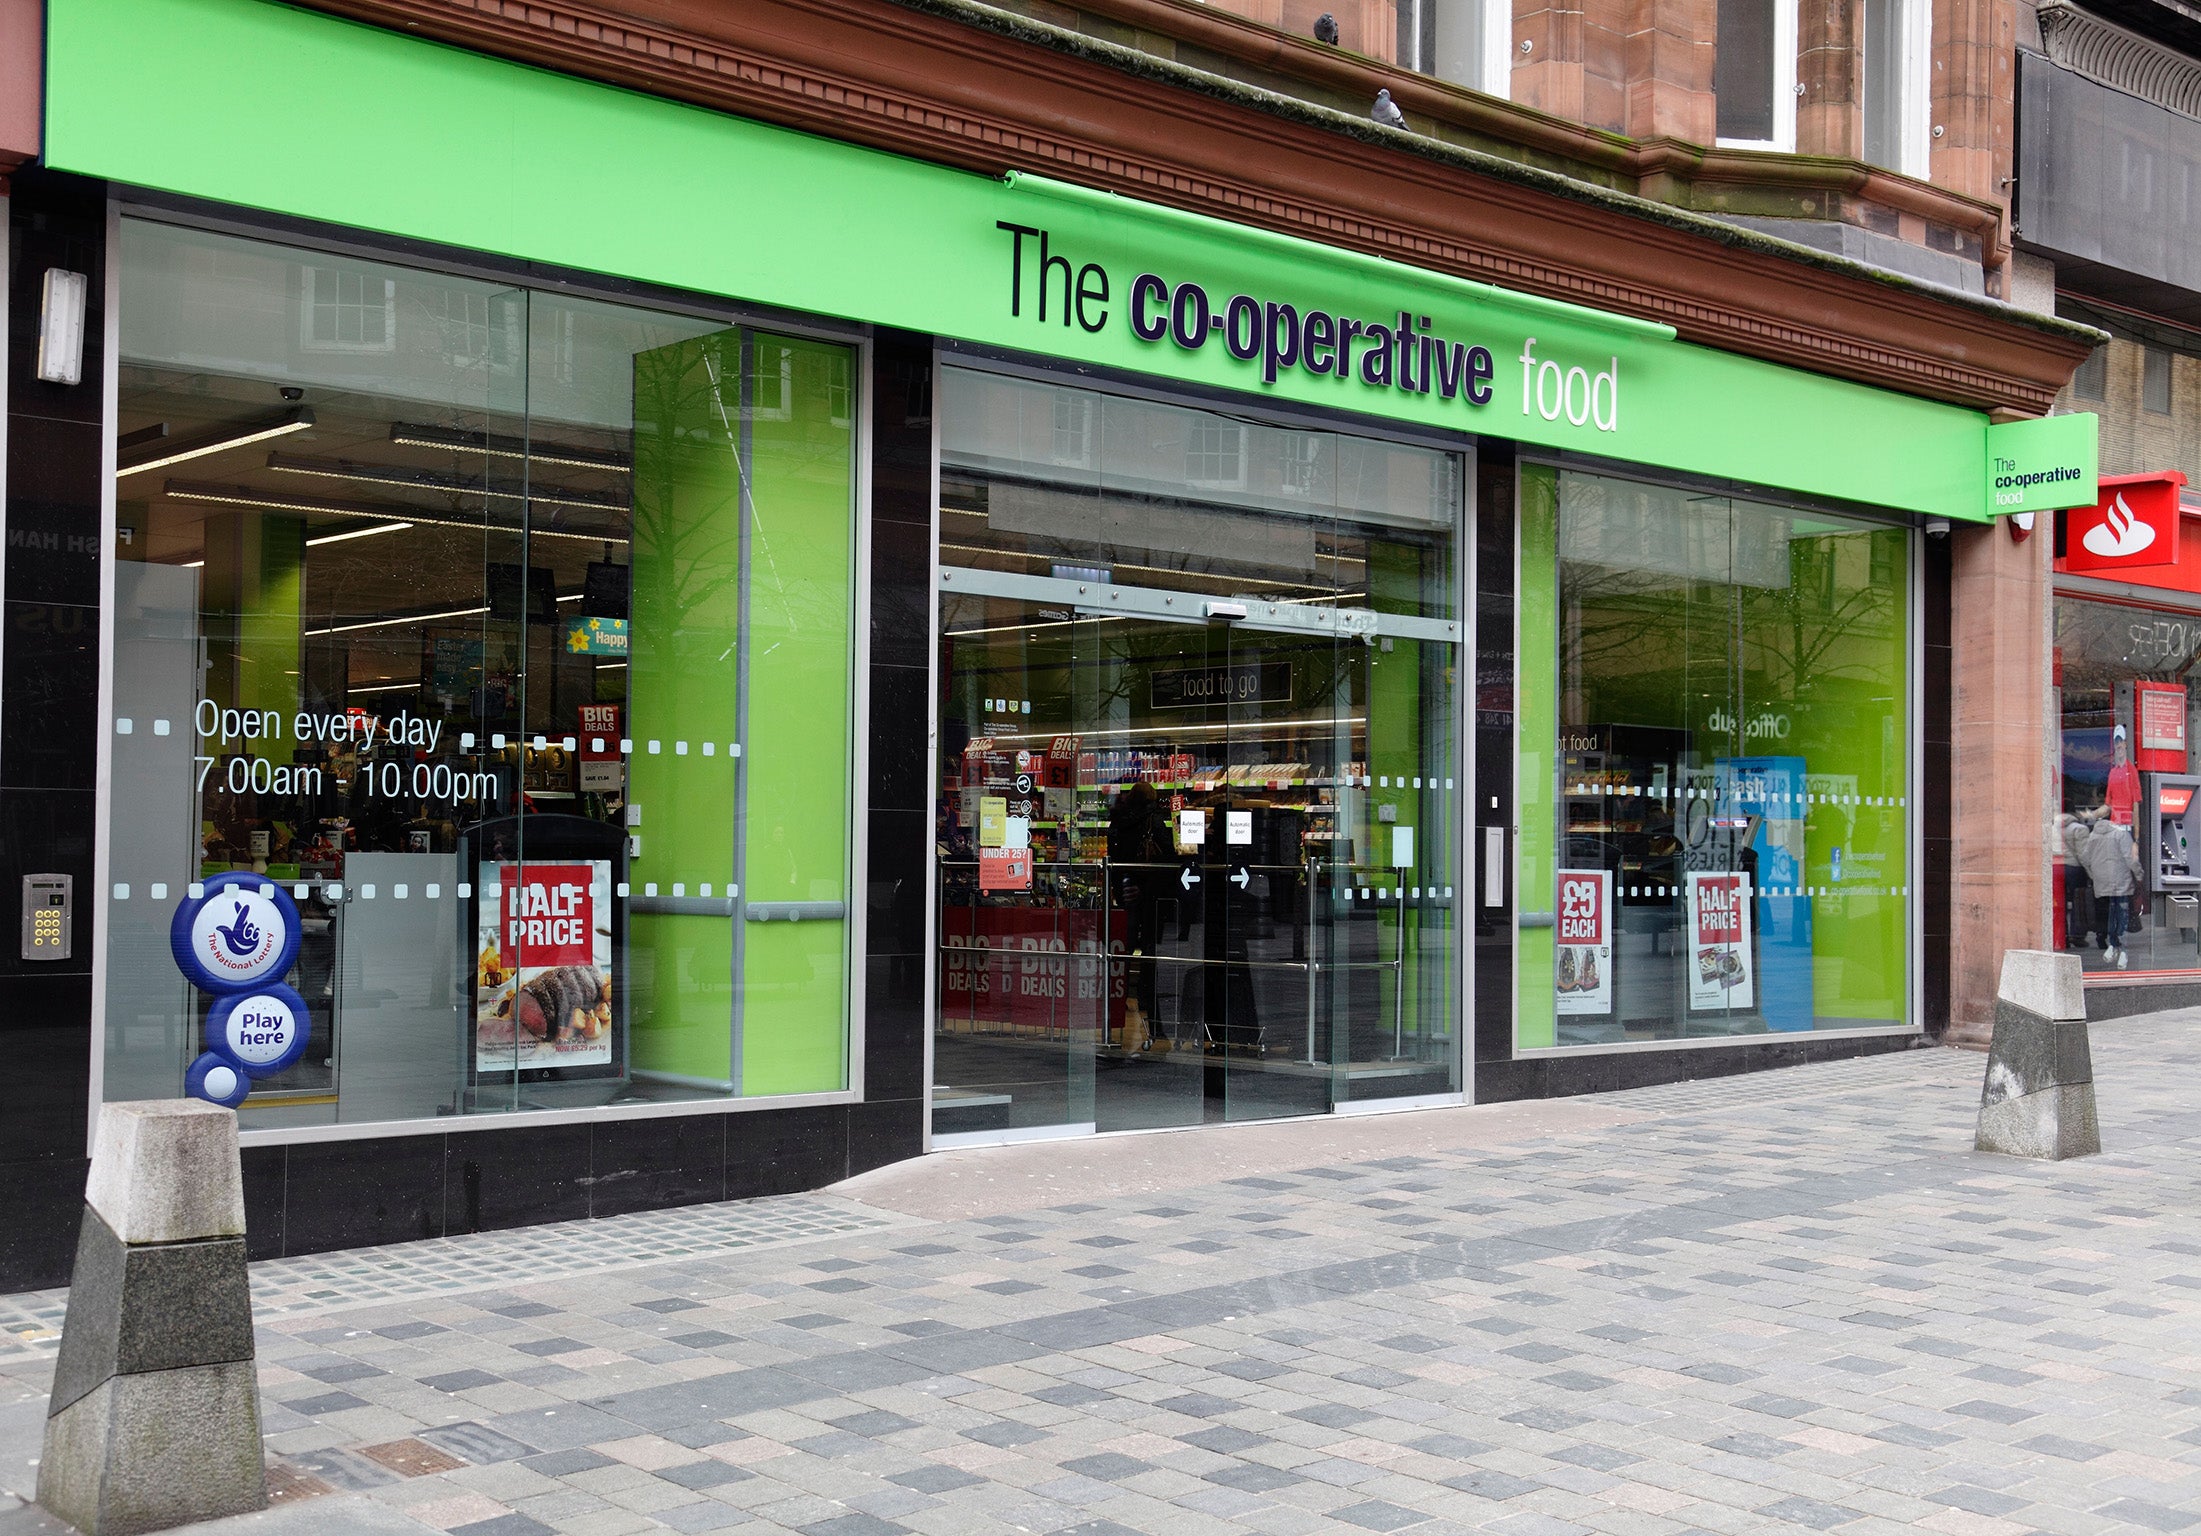 The Co-operative's strategy of focussing on convenience stores like this one has been a success